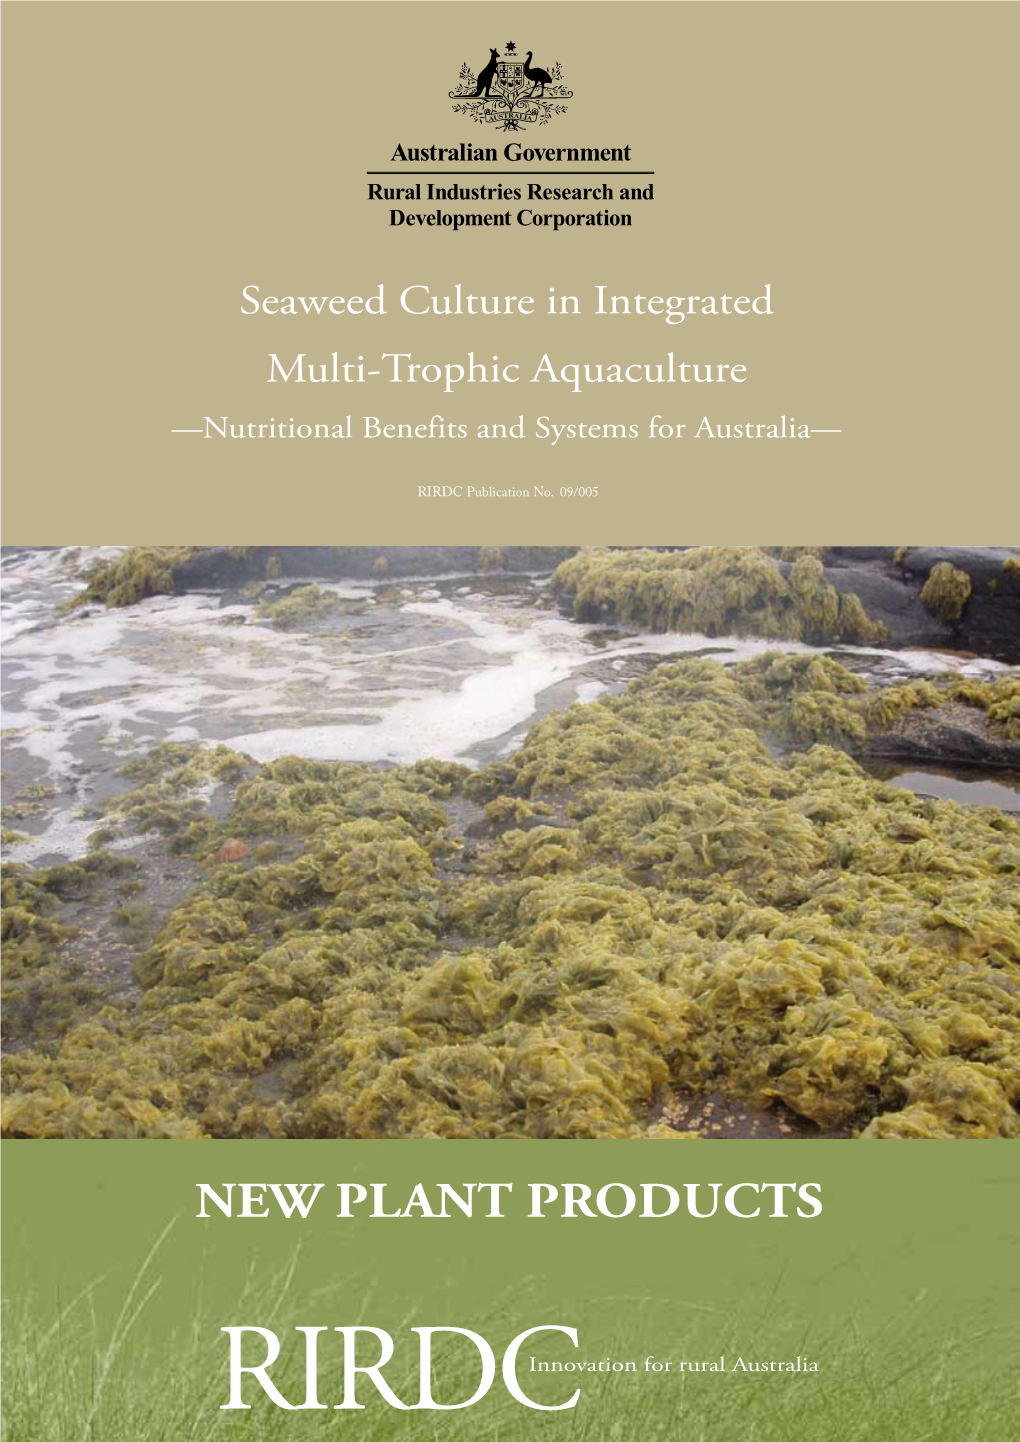 Seaweed Culture in Integrated Multi-Trophic Aquaculture —Nutritional Benefits and Systems for Australia—